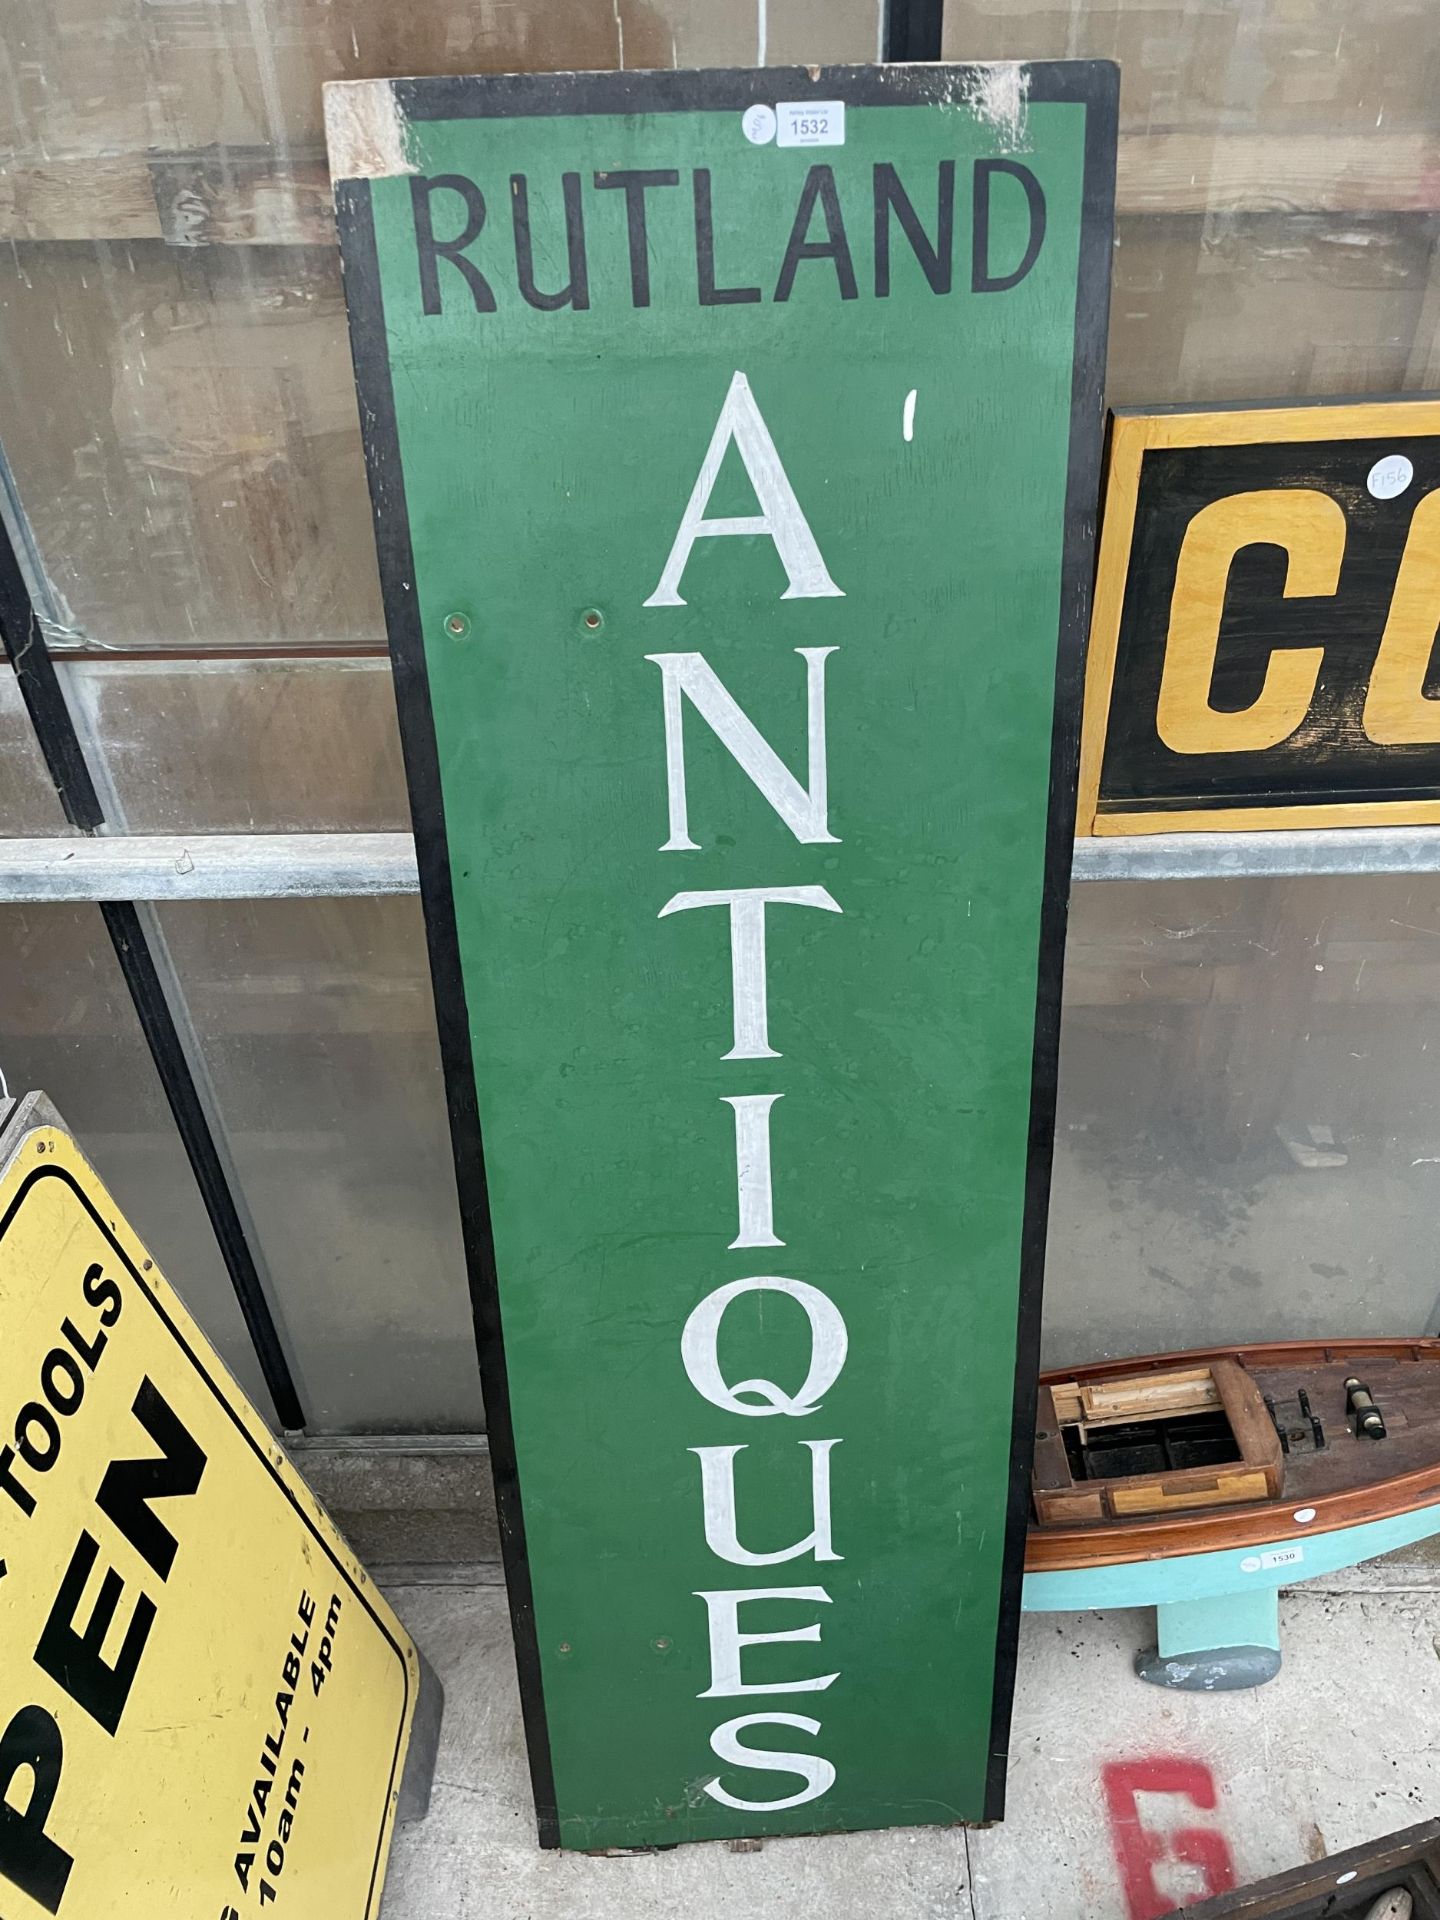 A WOODEN HAND PAINTED 'RUTLAND ANTIQUES' SIGN